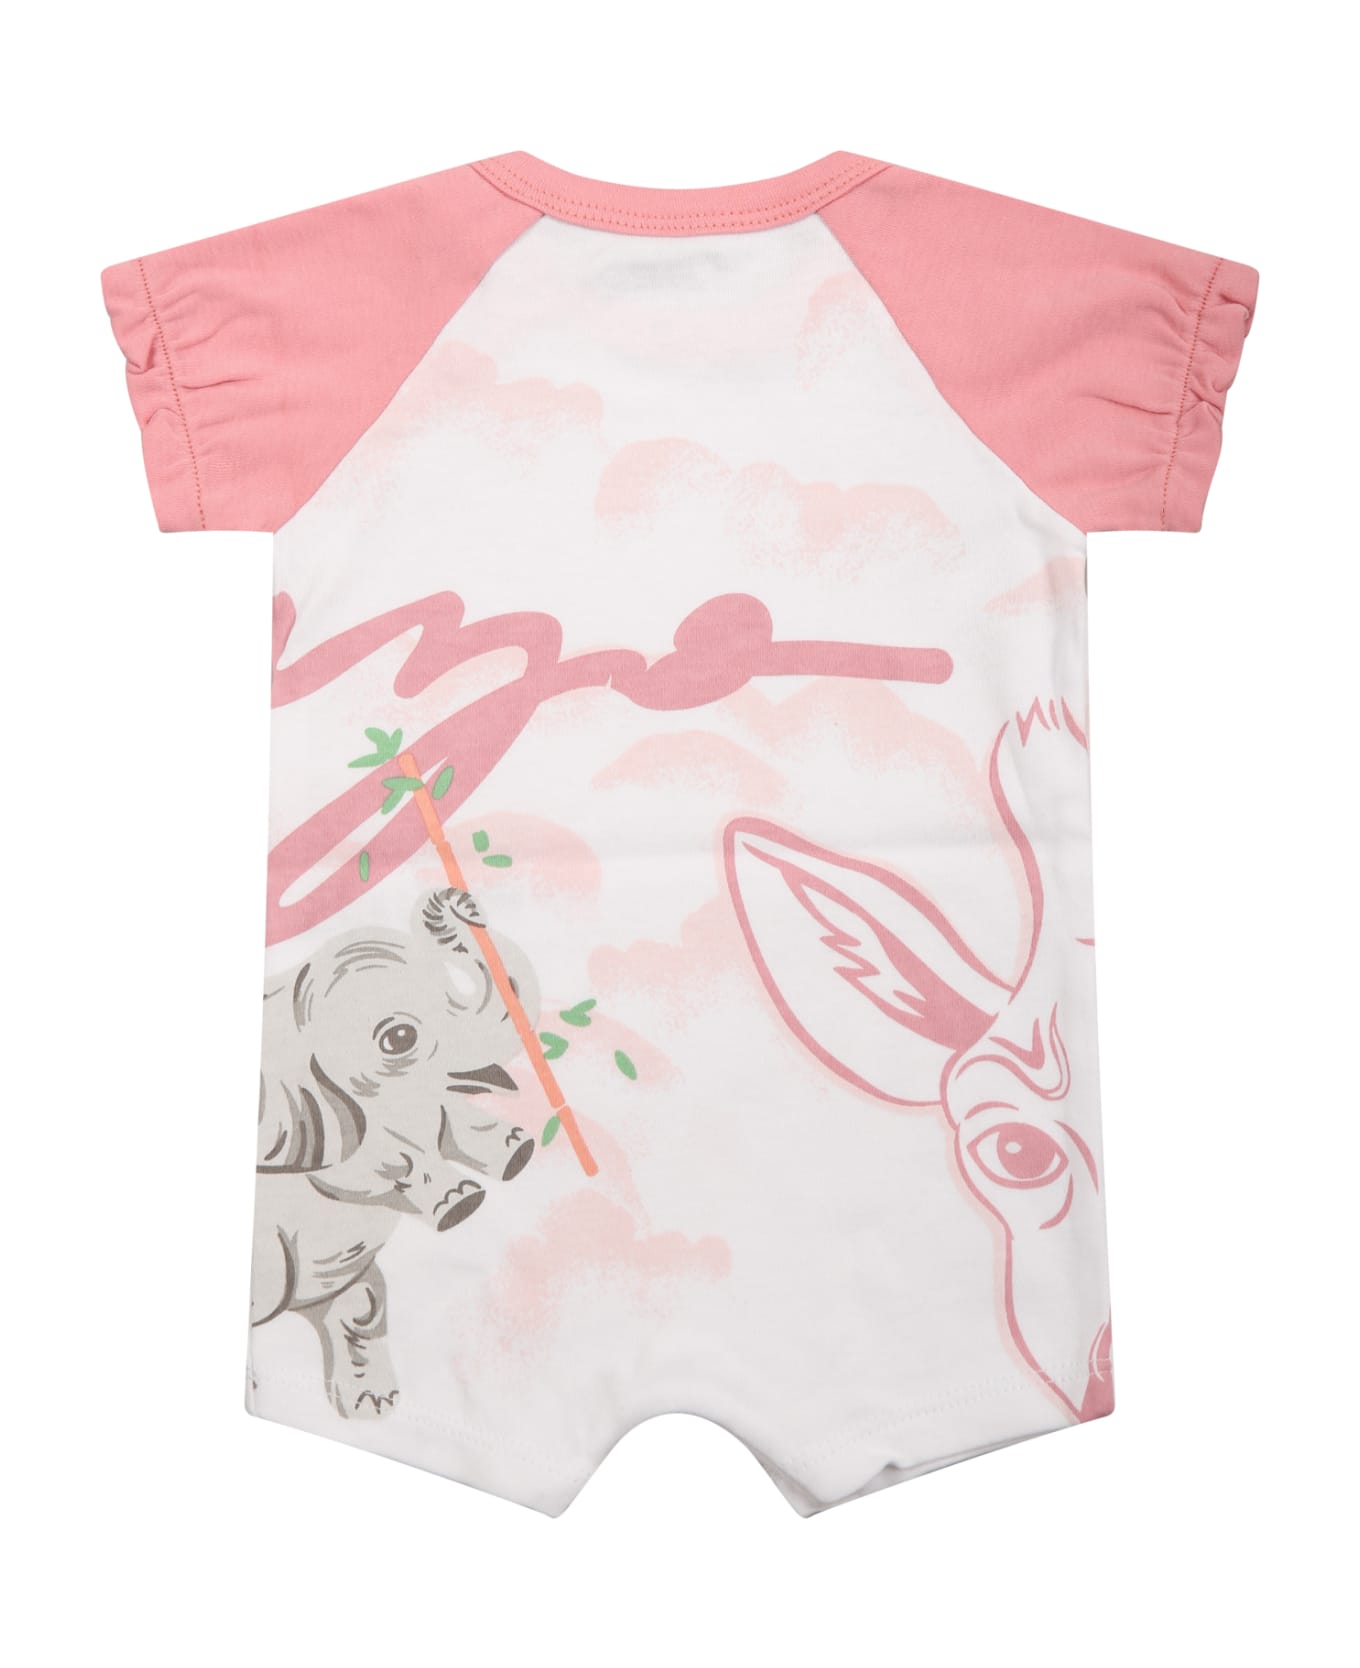 Kenzo Kids Pink Romper For Baby Girl With Animals And Logo - Multicolor